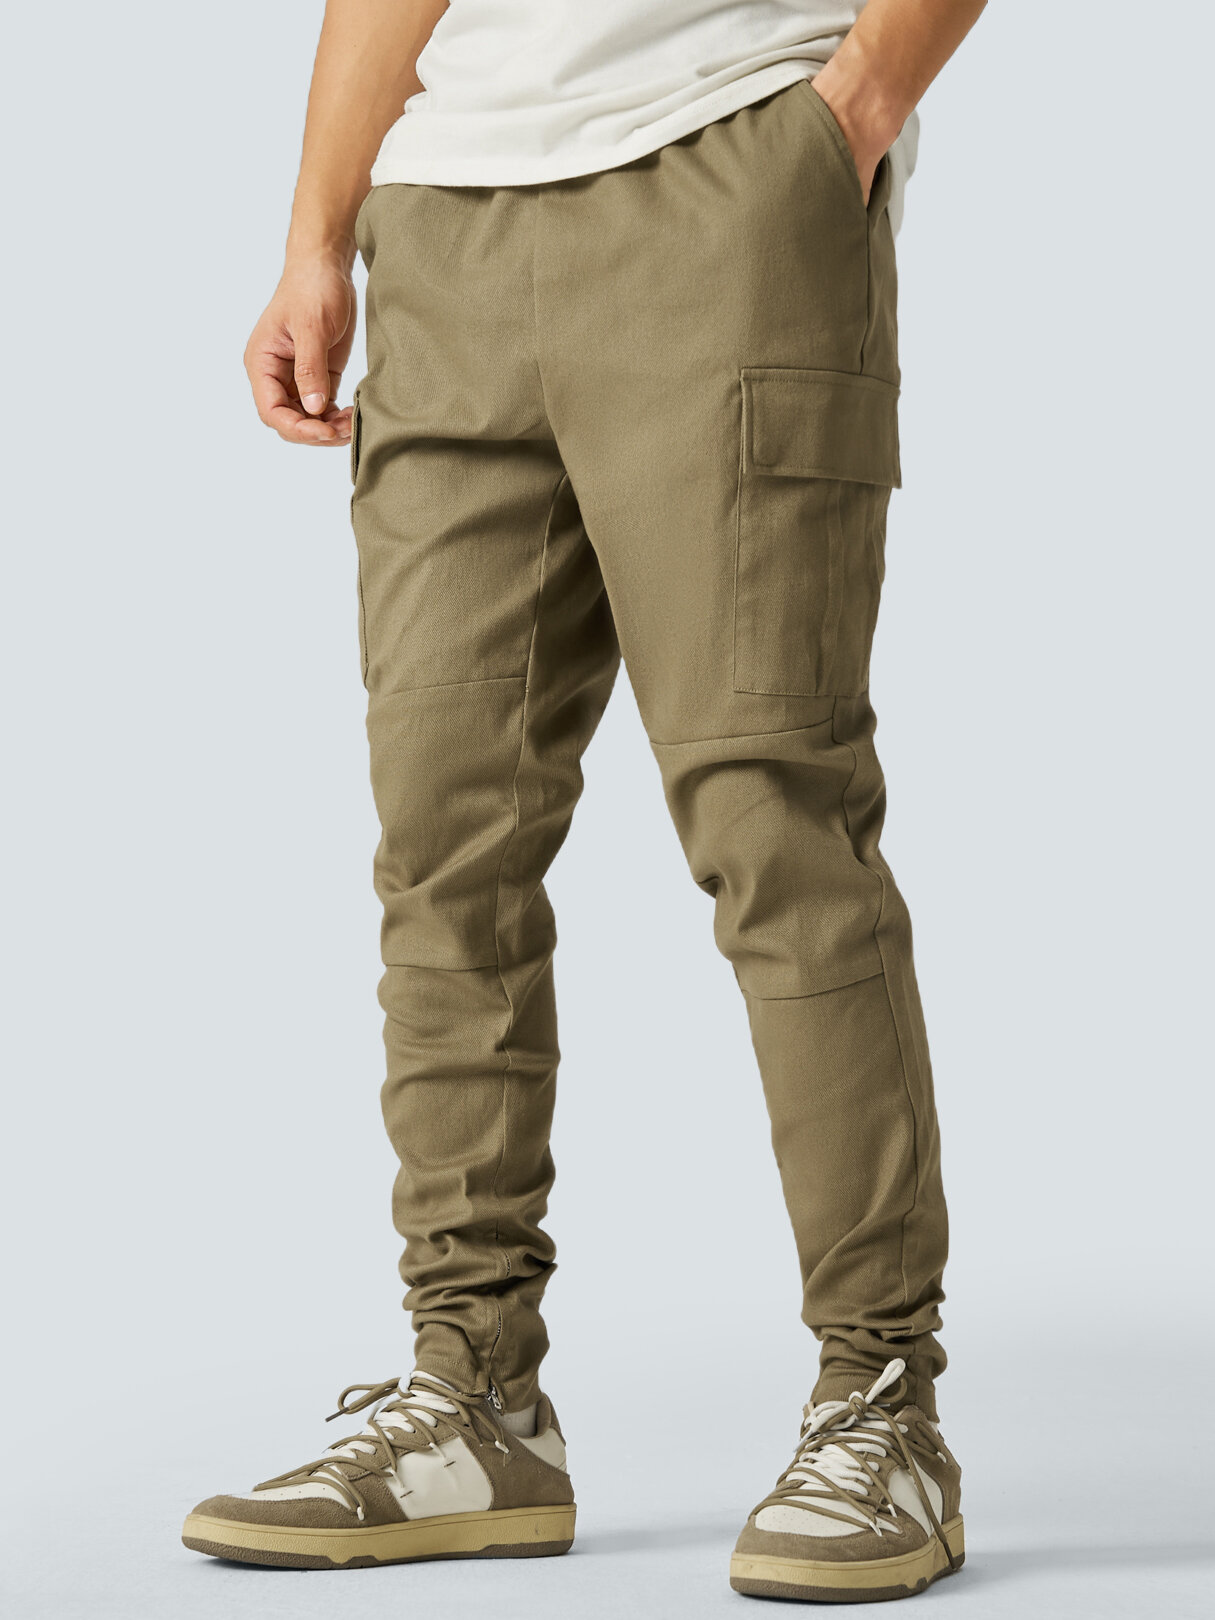 Mens Solid Color Seam Detail Zip Cuff Cargo Pants